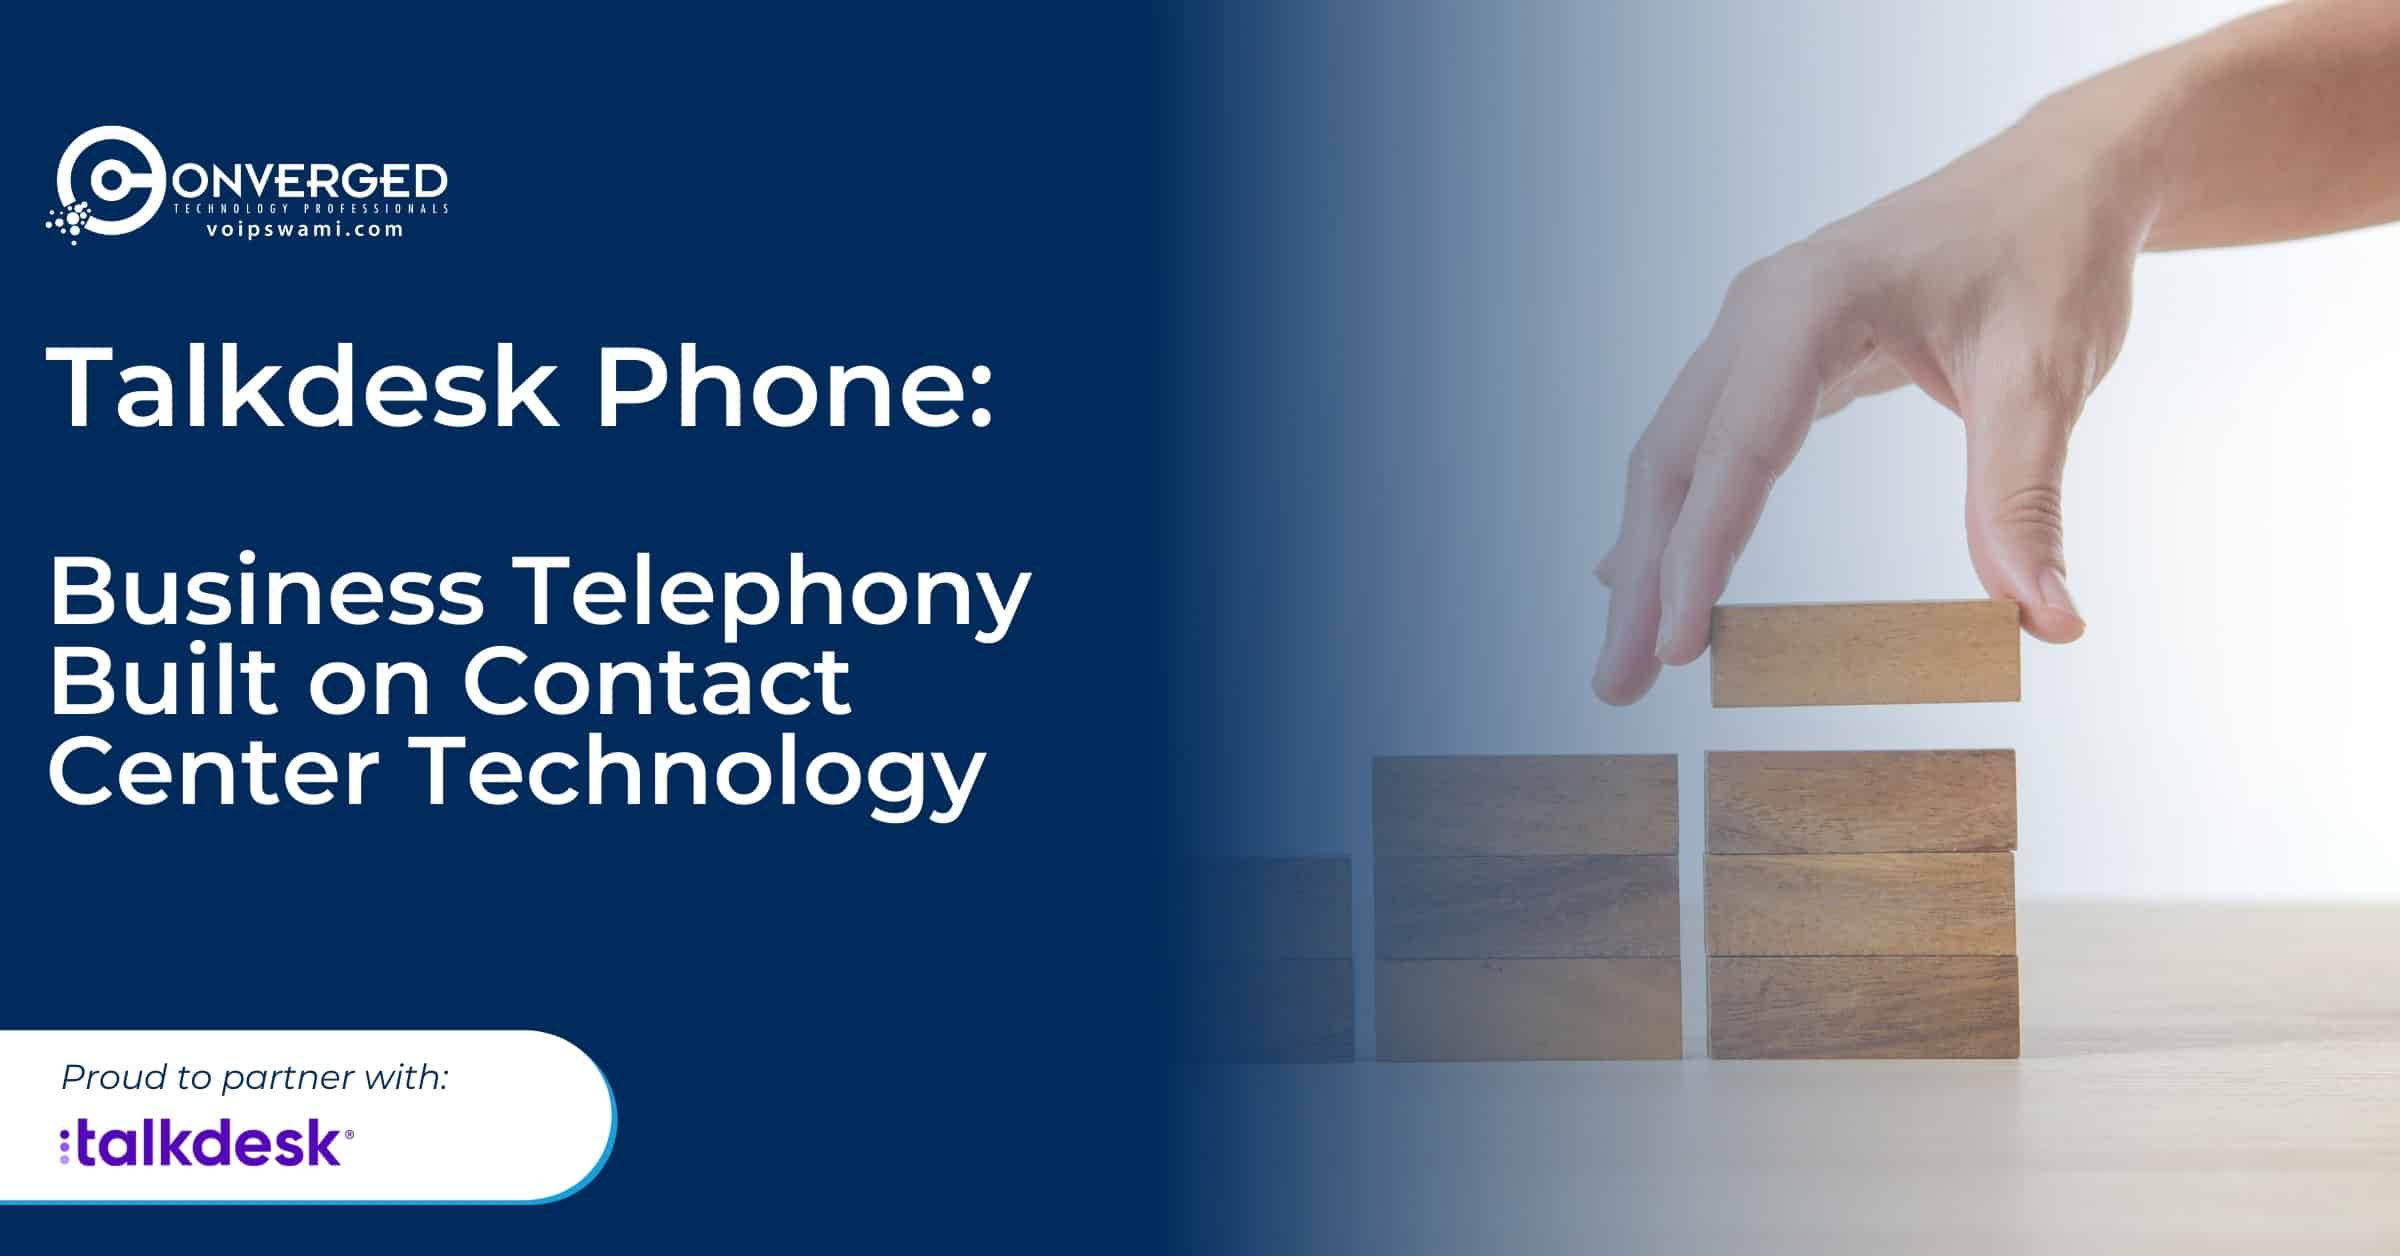 Talkdesk Phone: Business Telephony Built on Contact Center Technology